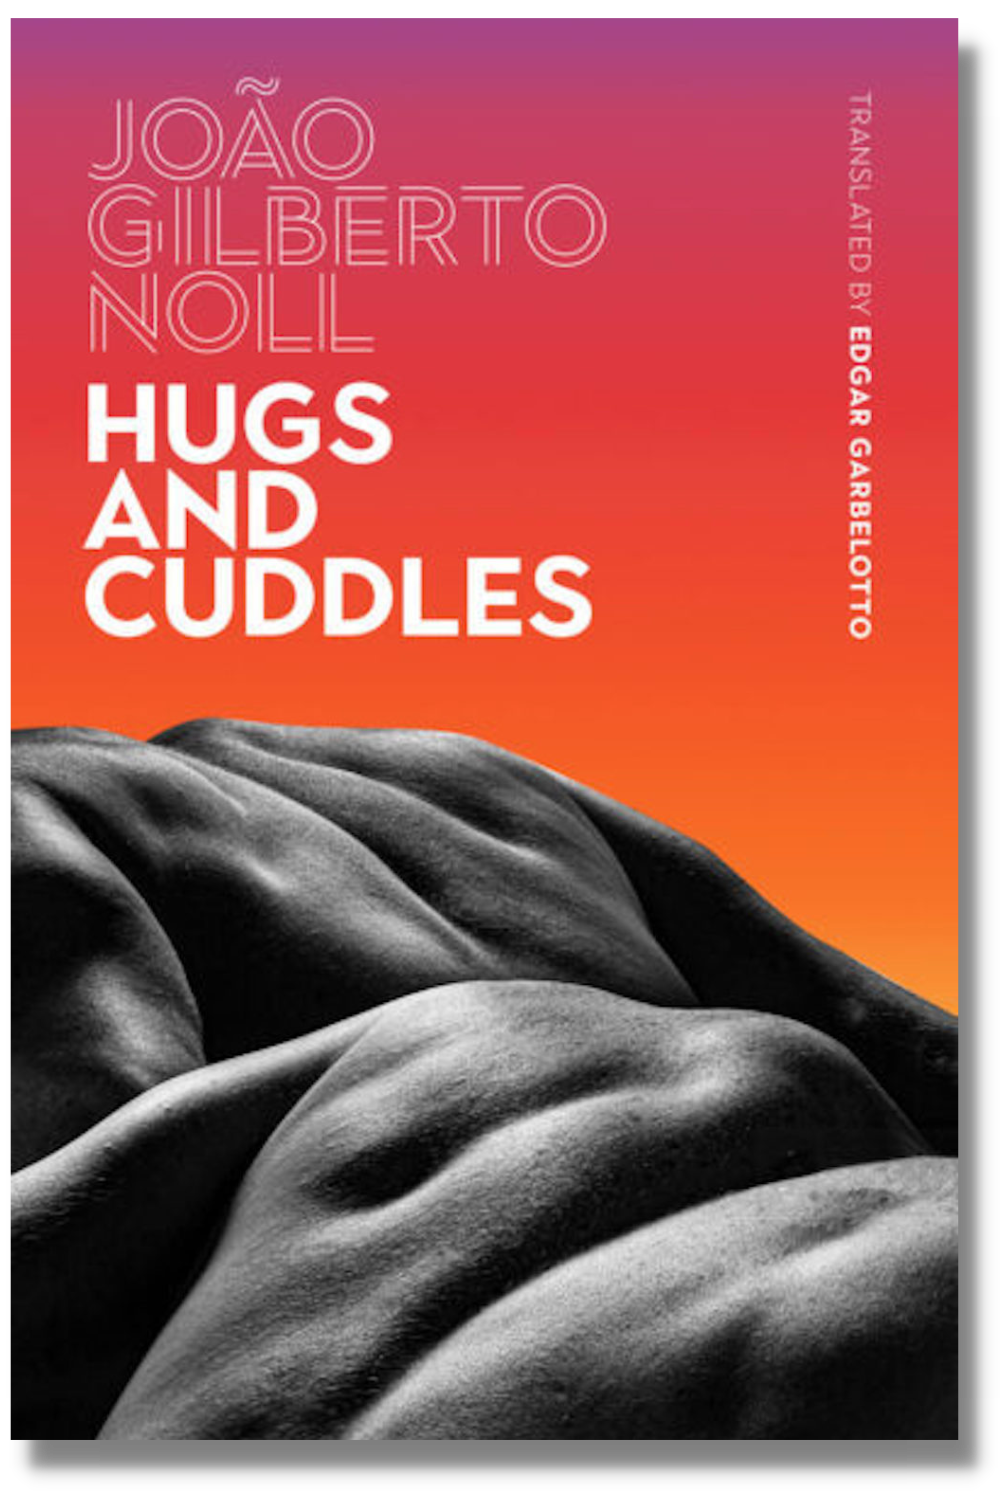 The cover of "Hugs and Cuddles"